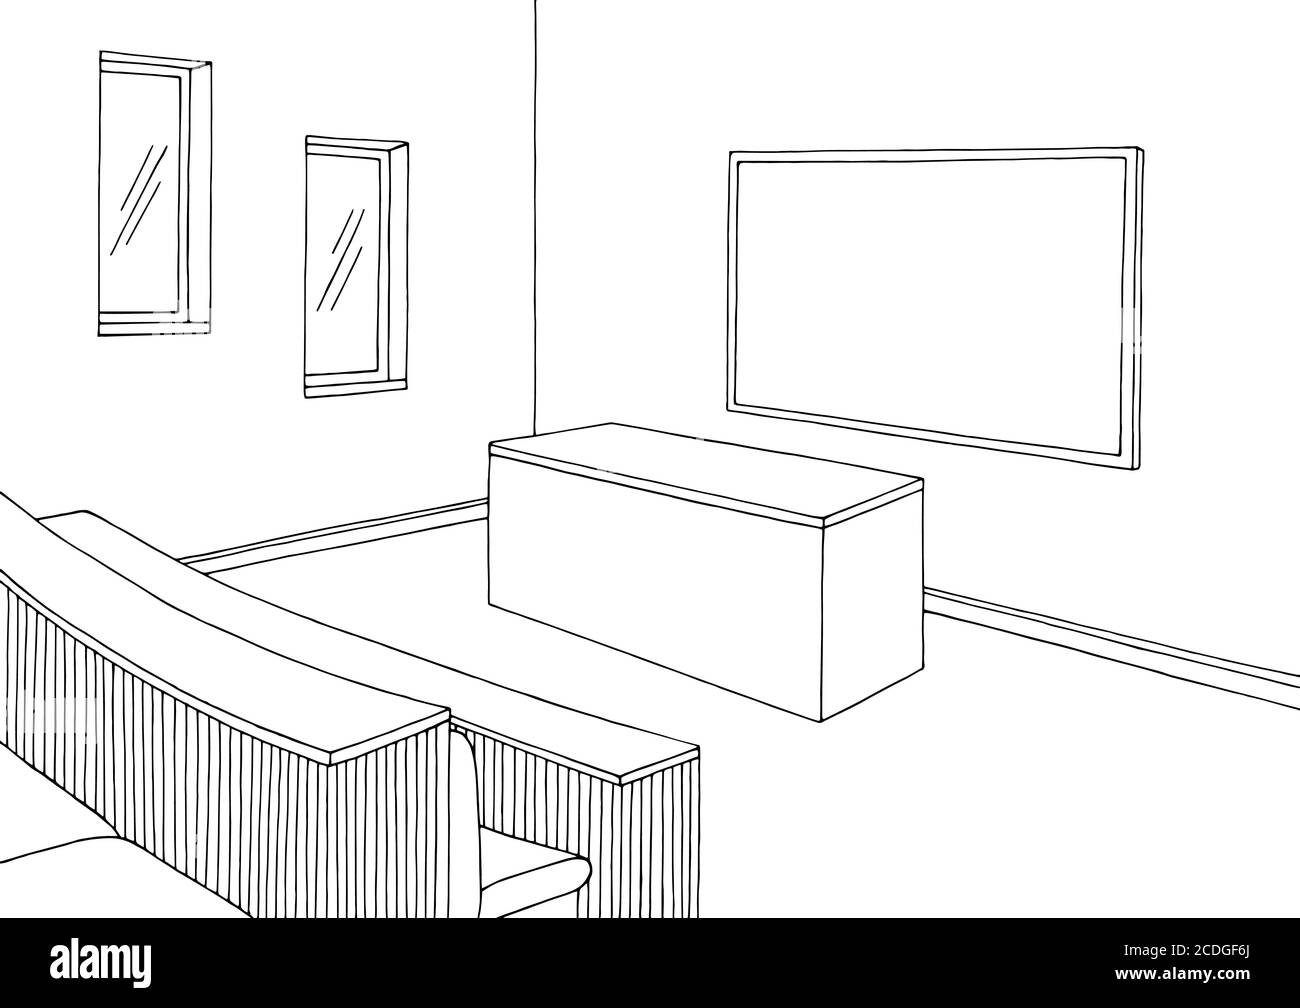 Linear Architectural Sketch Interior Classroom Stock Vector | Royalty-Free  | FreeImages